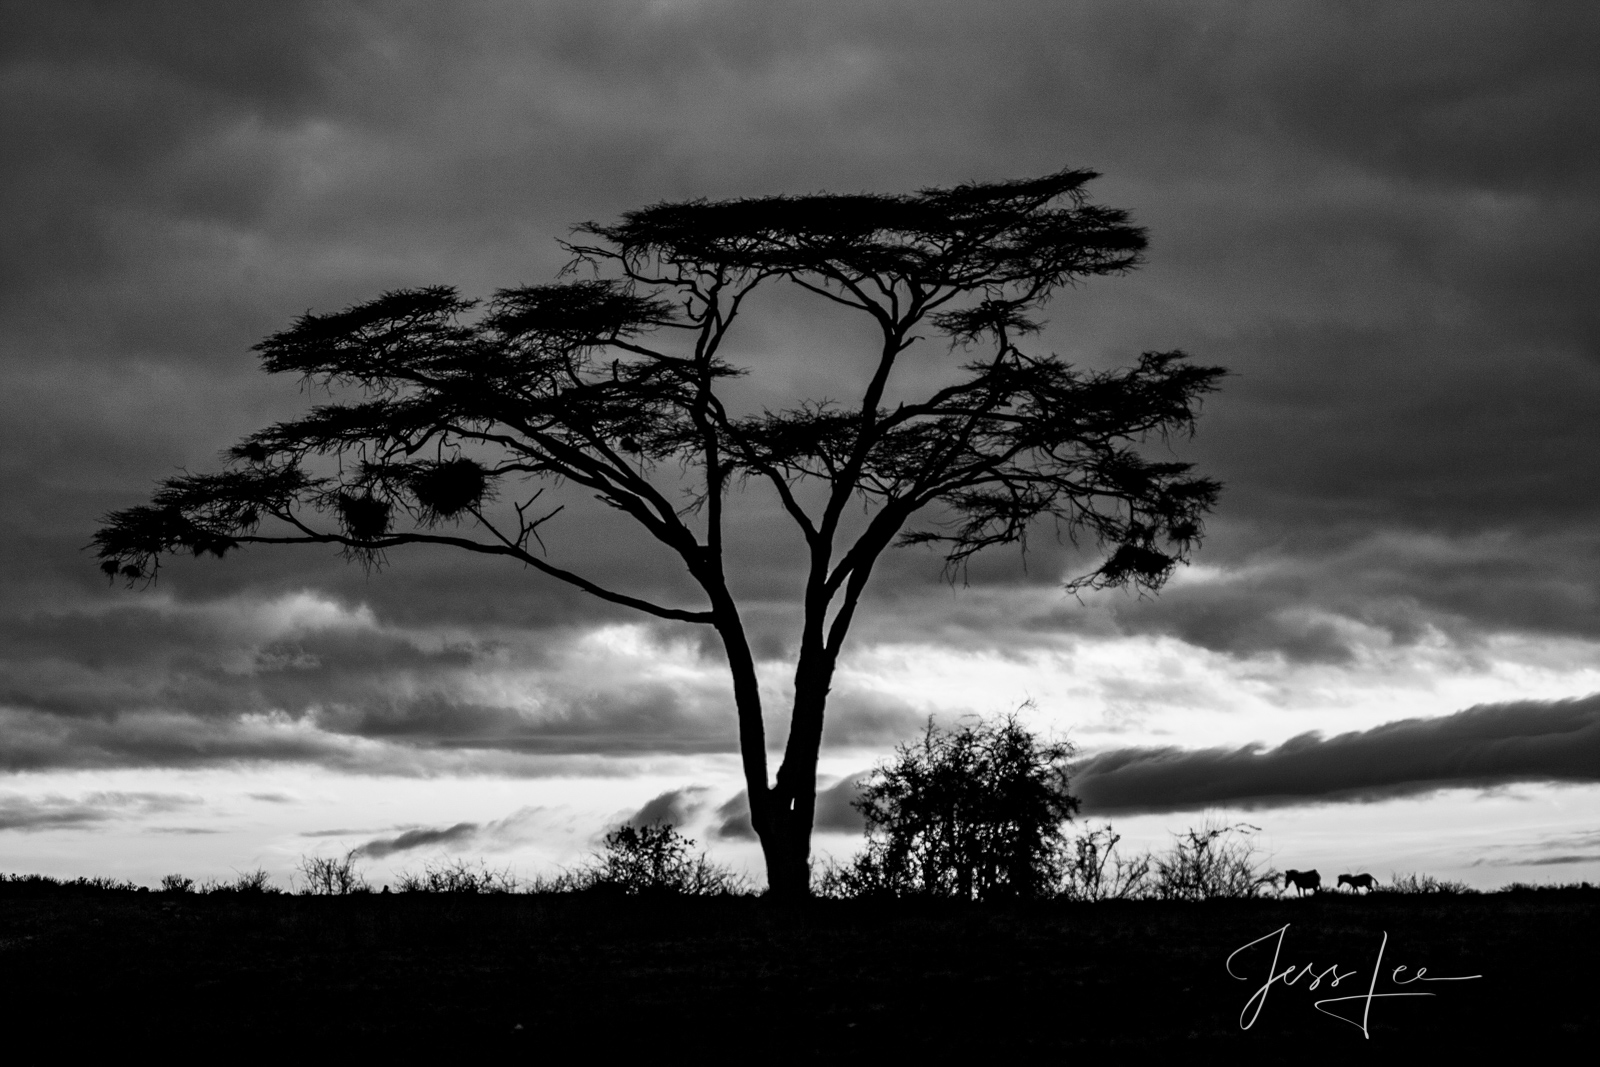 Bring home this classic style Black and White, Desert Southwest,  Fine Art Print. A Limited Edition of 50.  Copyright © Jess...